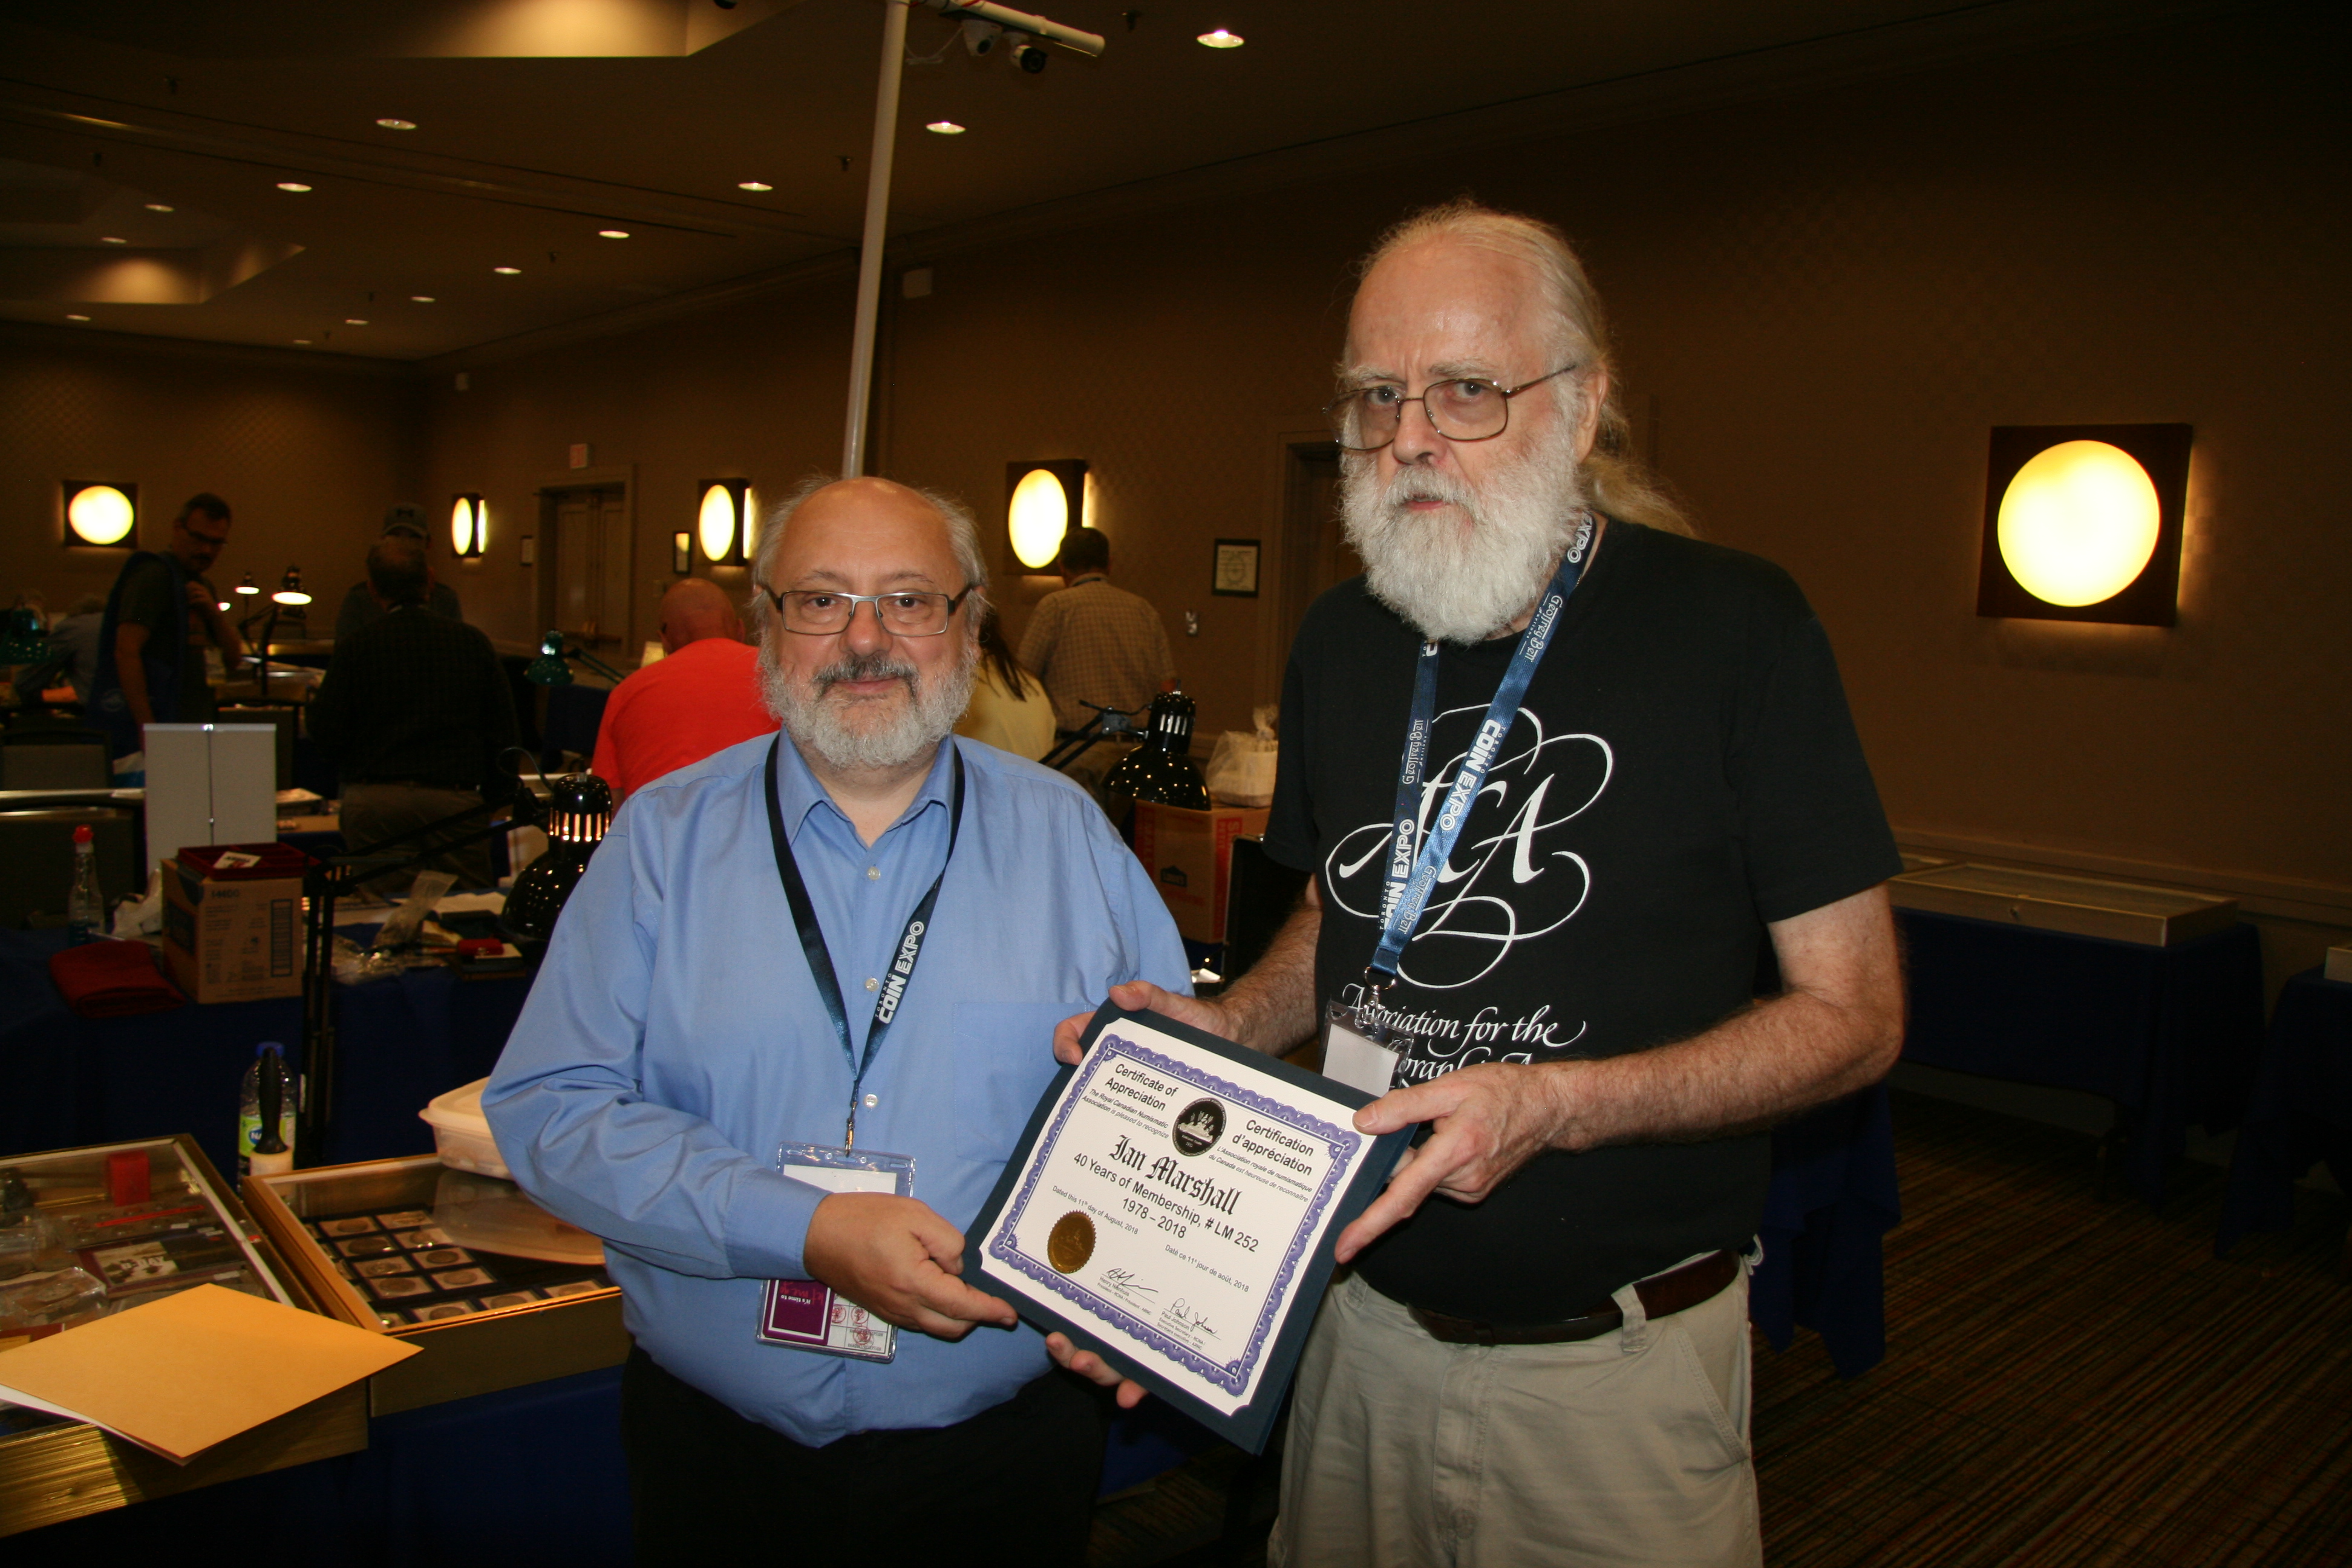 <p><strong>Ian Marshall</strong> (right) receiving his 40 years of membership recognition award from <strong>Henry Nienhuis</strong> (left).<br> <small>Dan Gosling photo</small></p>